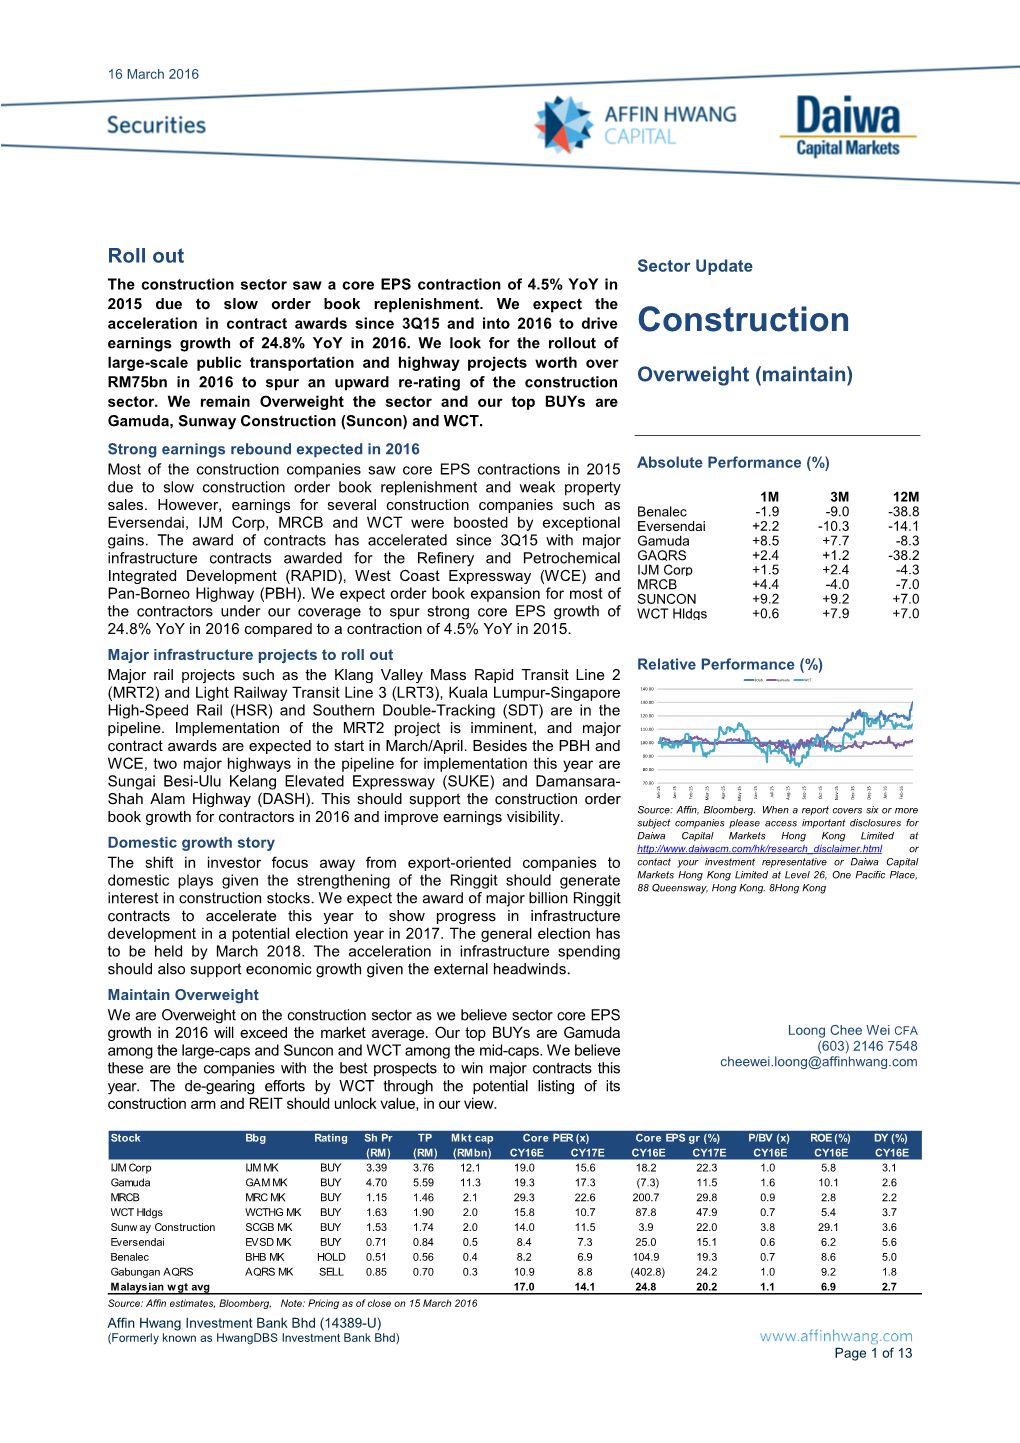 Construction Sector Saw a Core EPS Contraction of 4.5% Yoy in 2015 Due to Slow Order Book Replenishment